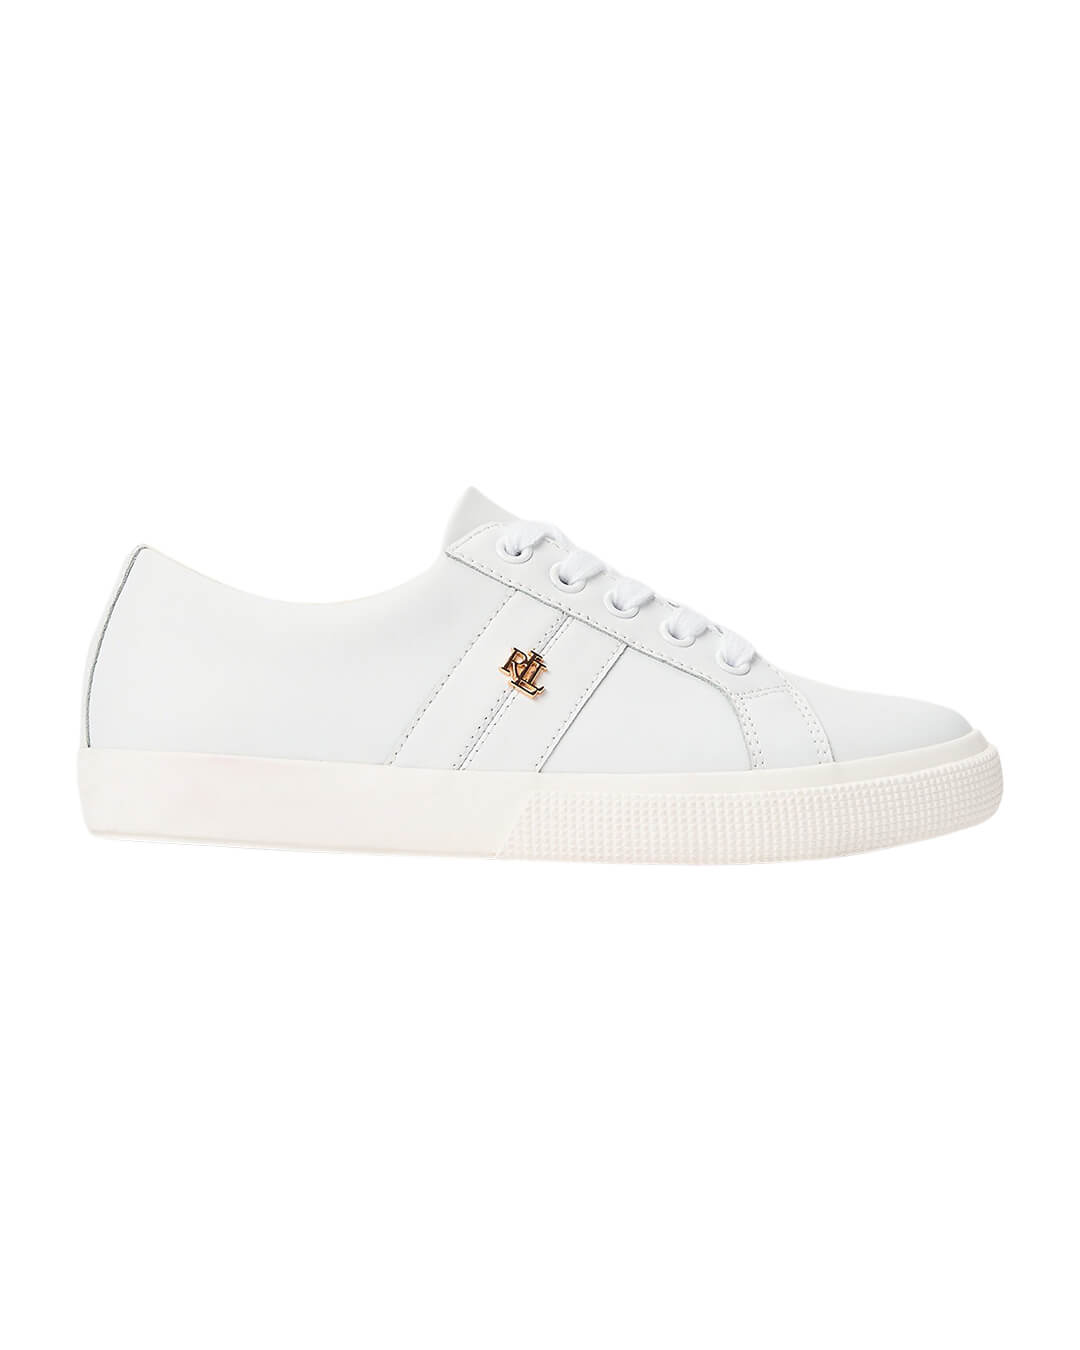 Lauren By Ralph Lauren Shoes Lauren By Ralph Lauren White Classic Sneakers